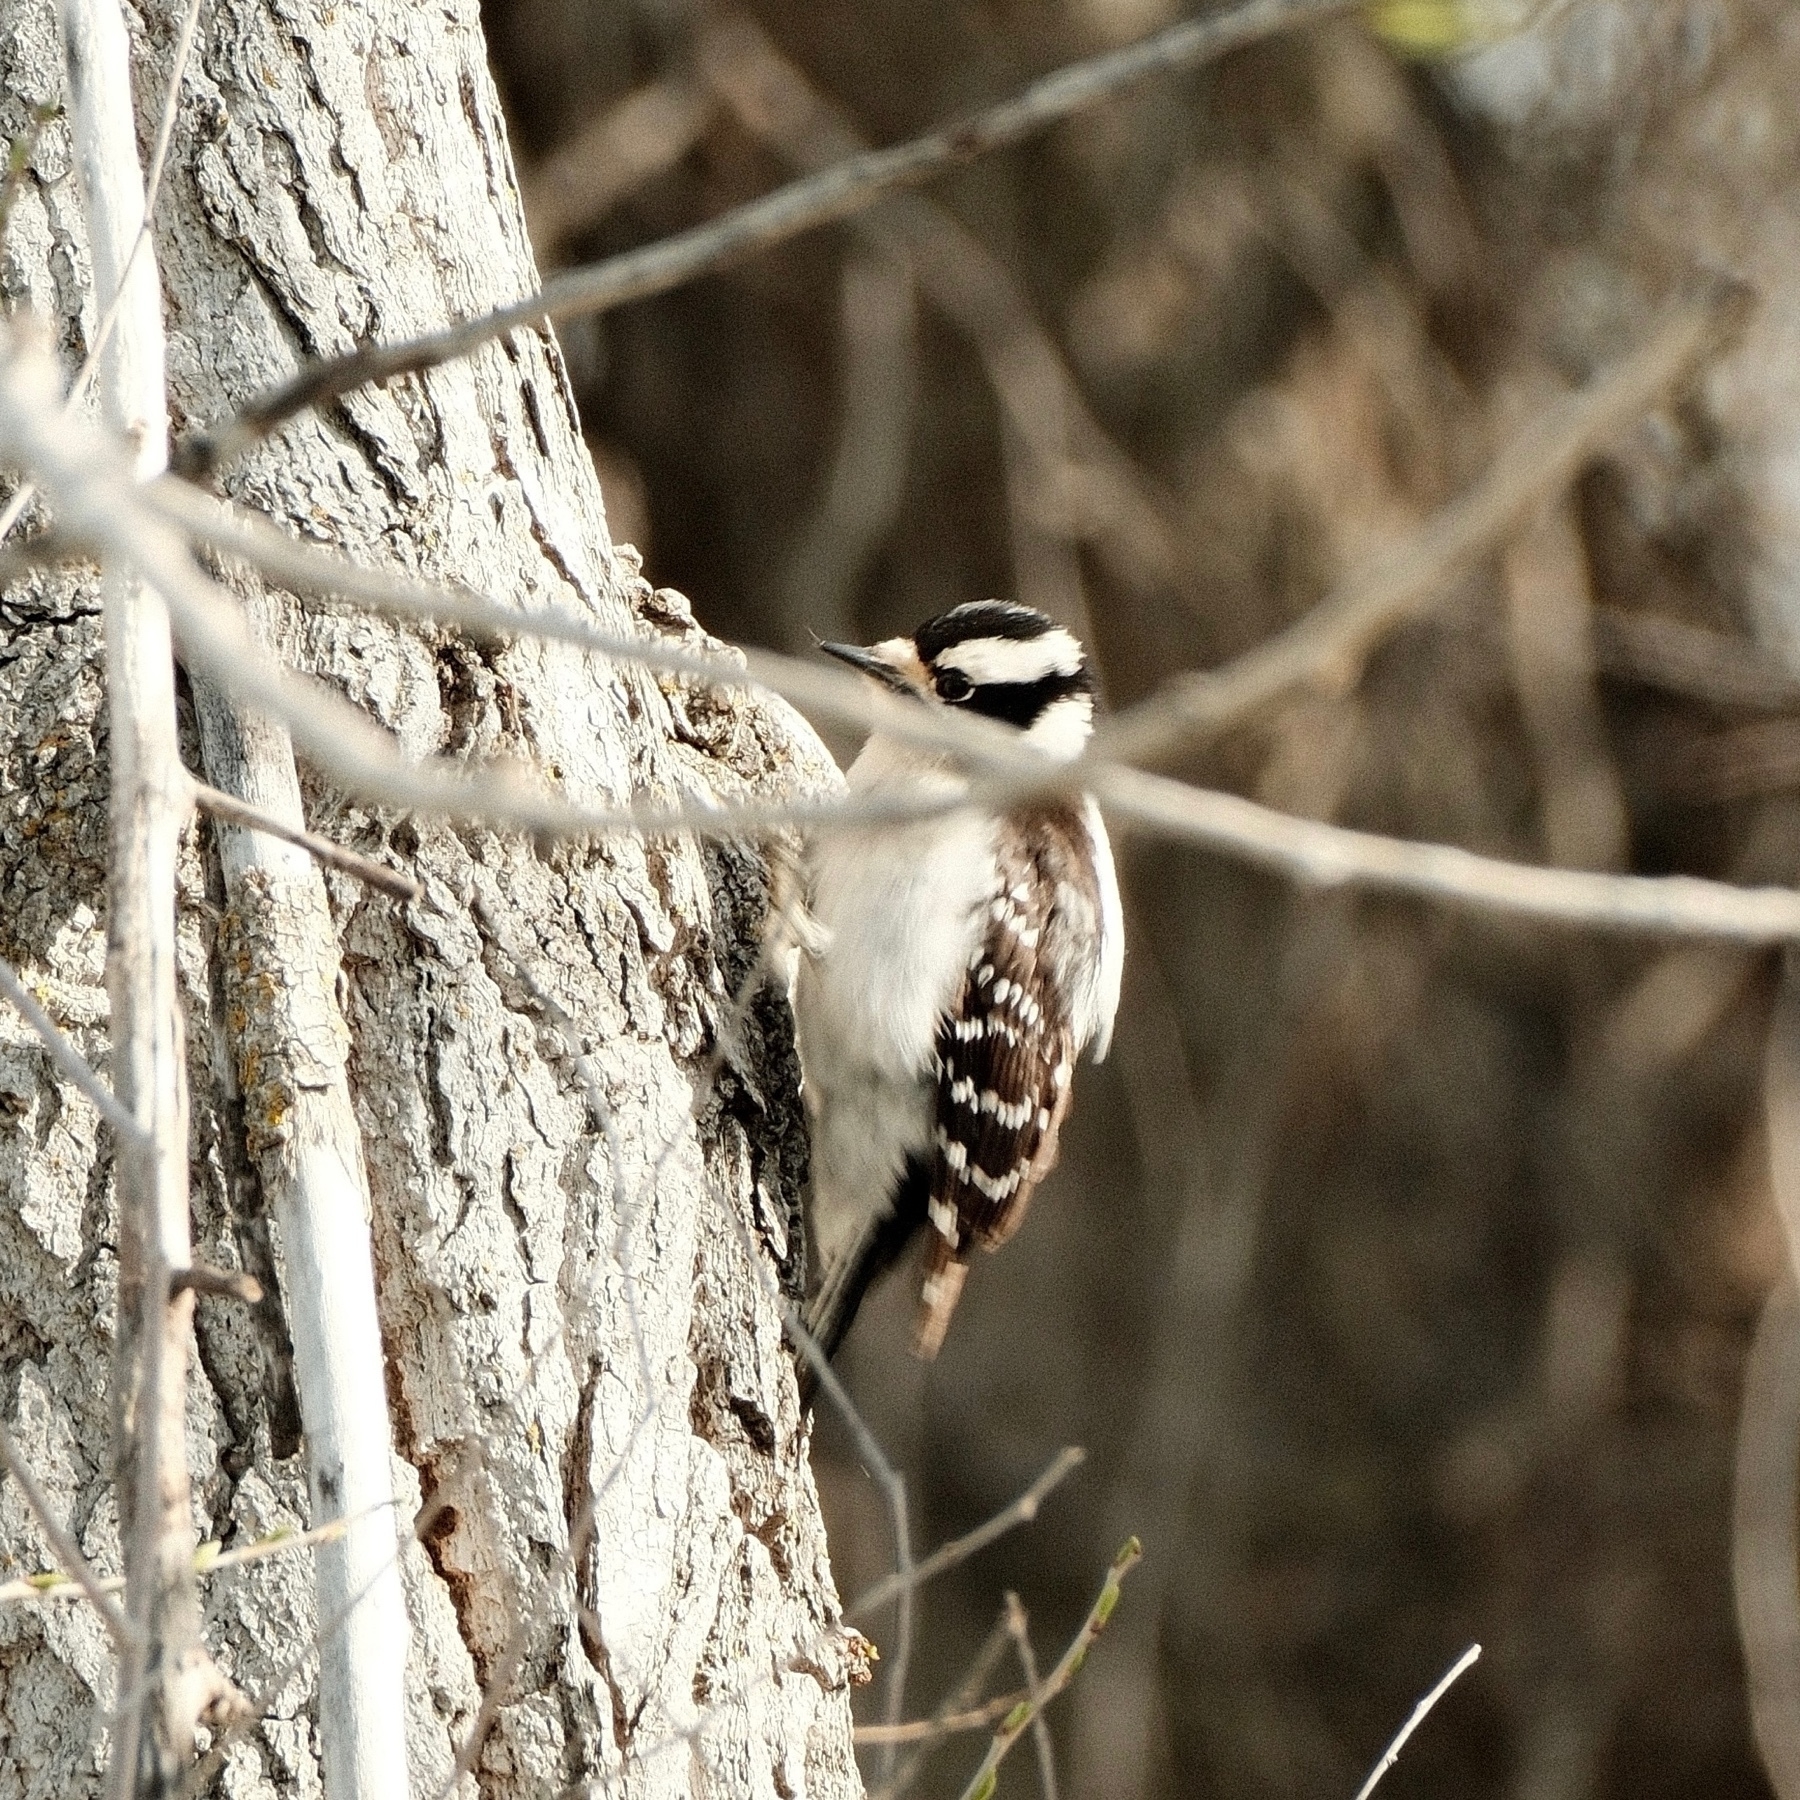 A petite Downy woodpecker with a black and white striped head and a black and white body that's kind of fluffy. It's foraging on a tree trunk. There's a twig in front of its face.